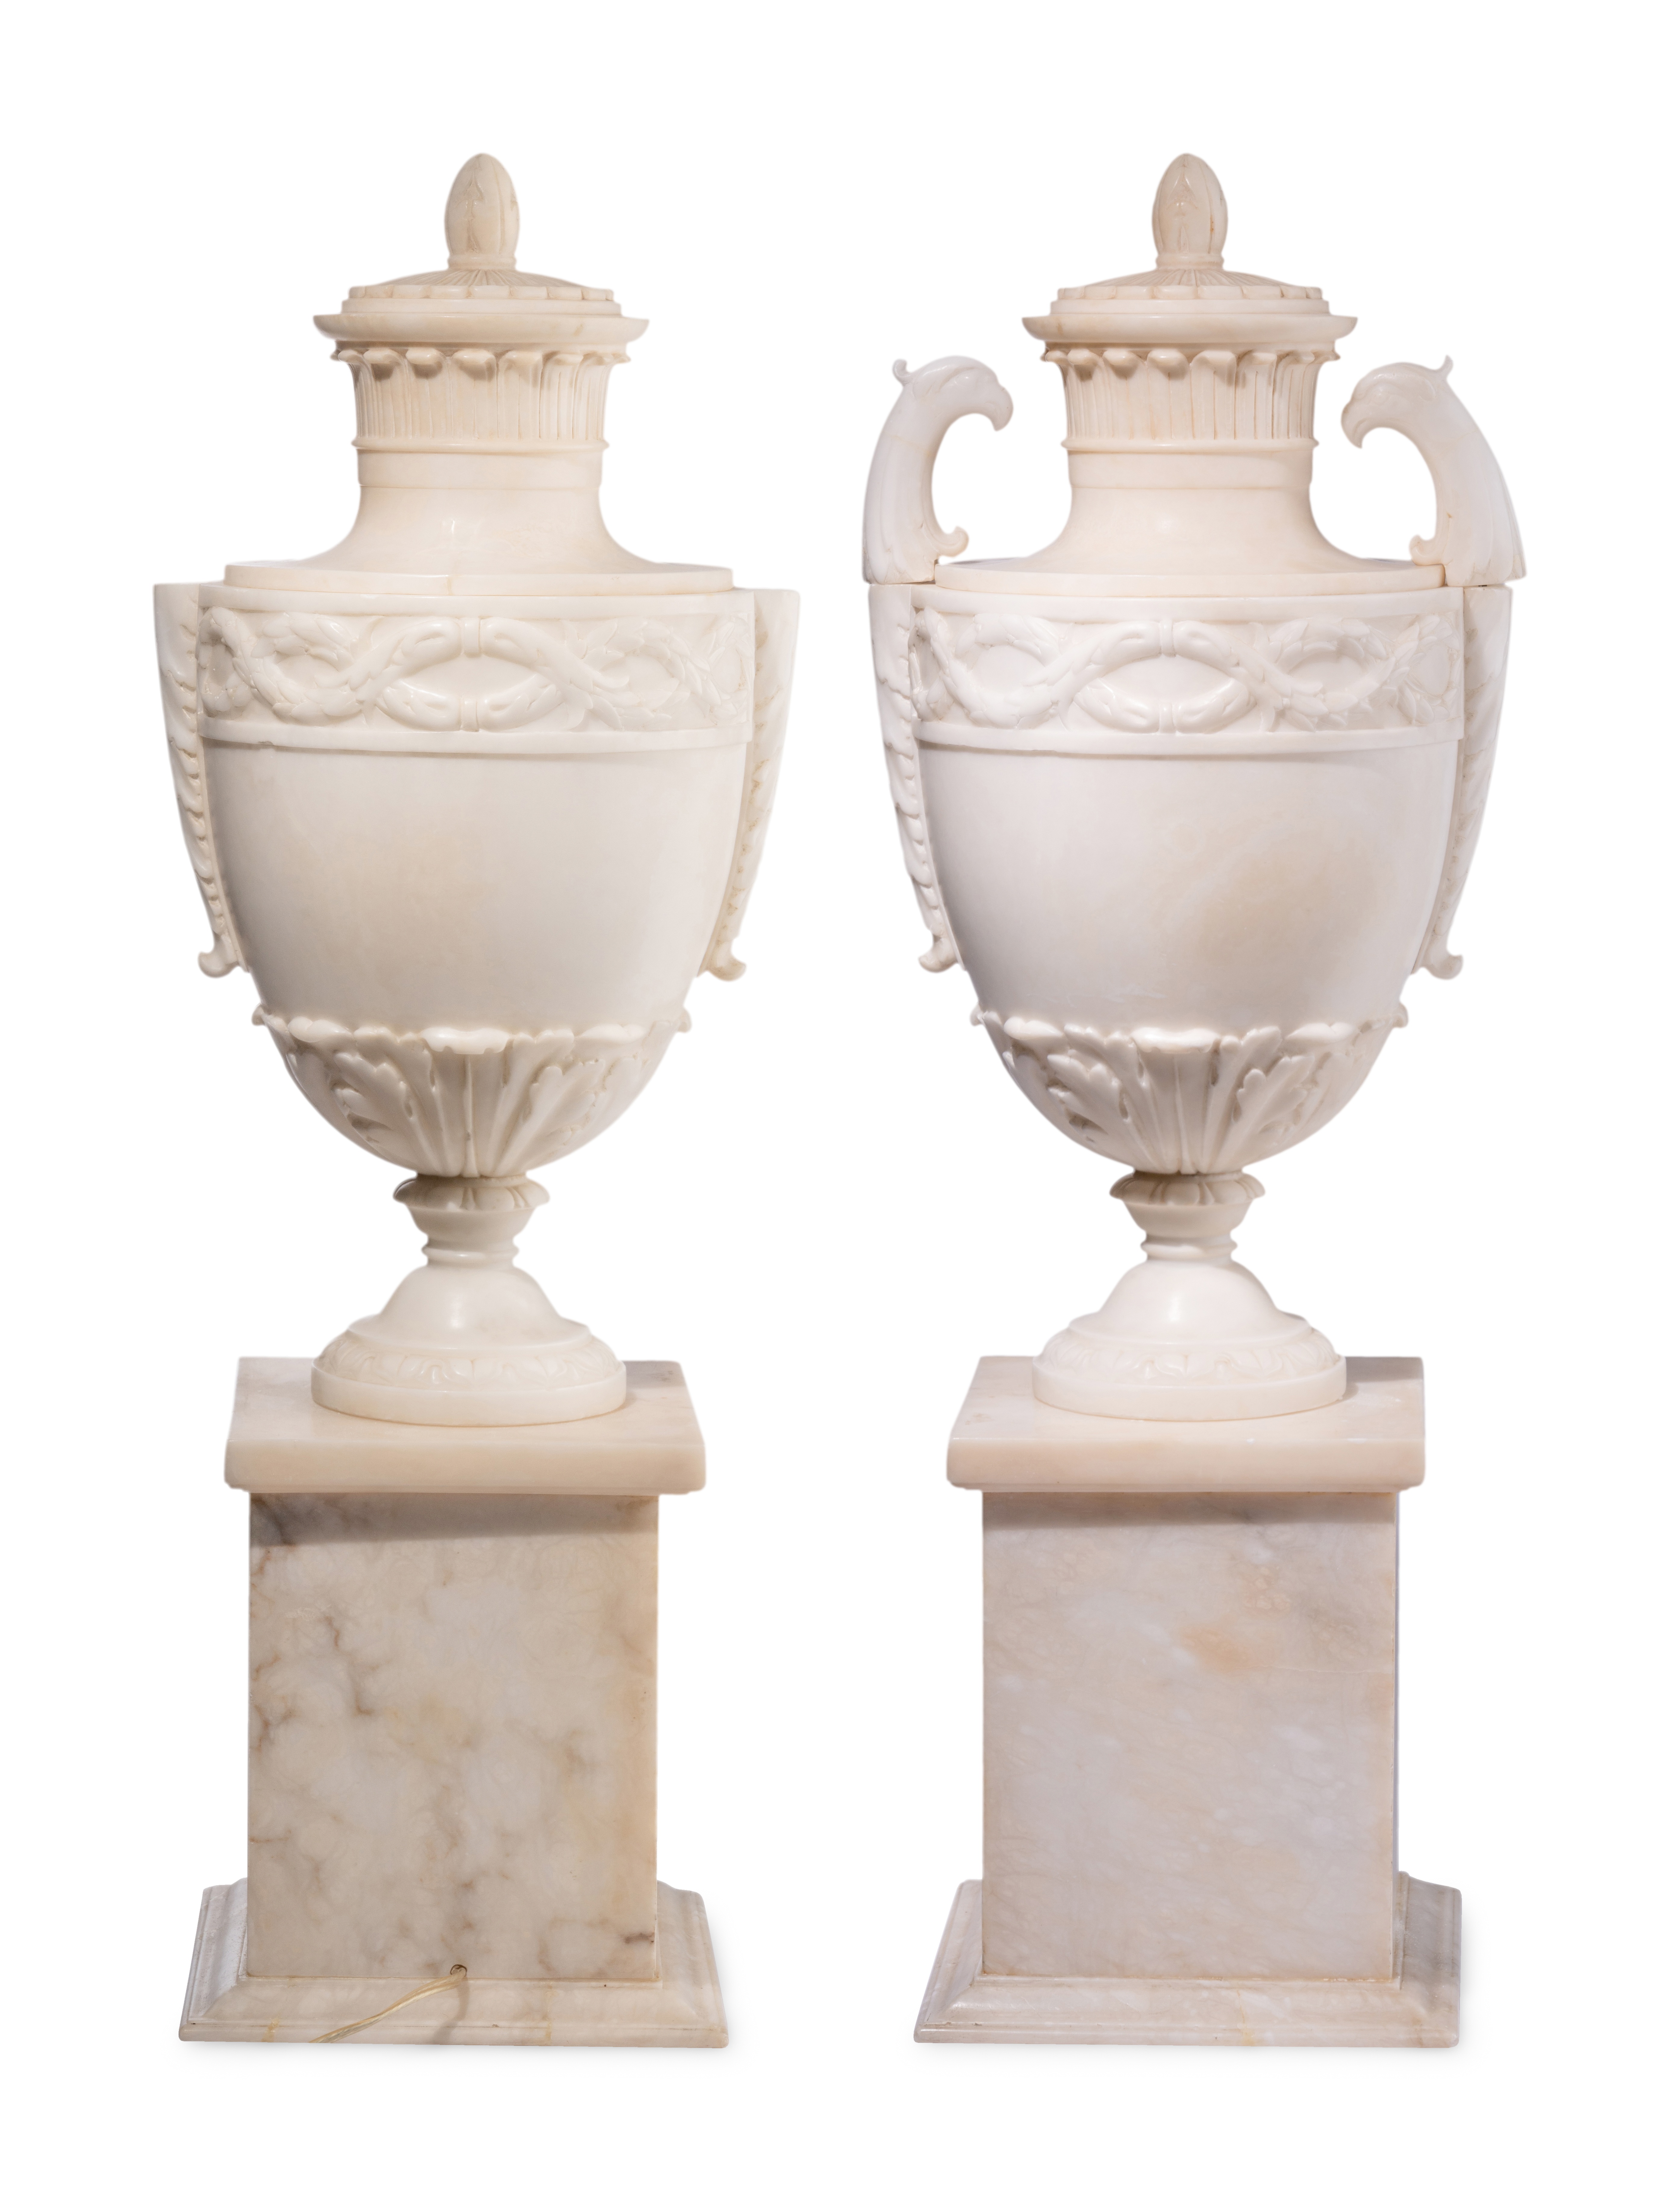 A Pair of Italian Alabaster Urns and Covers - Image 3 of 7